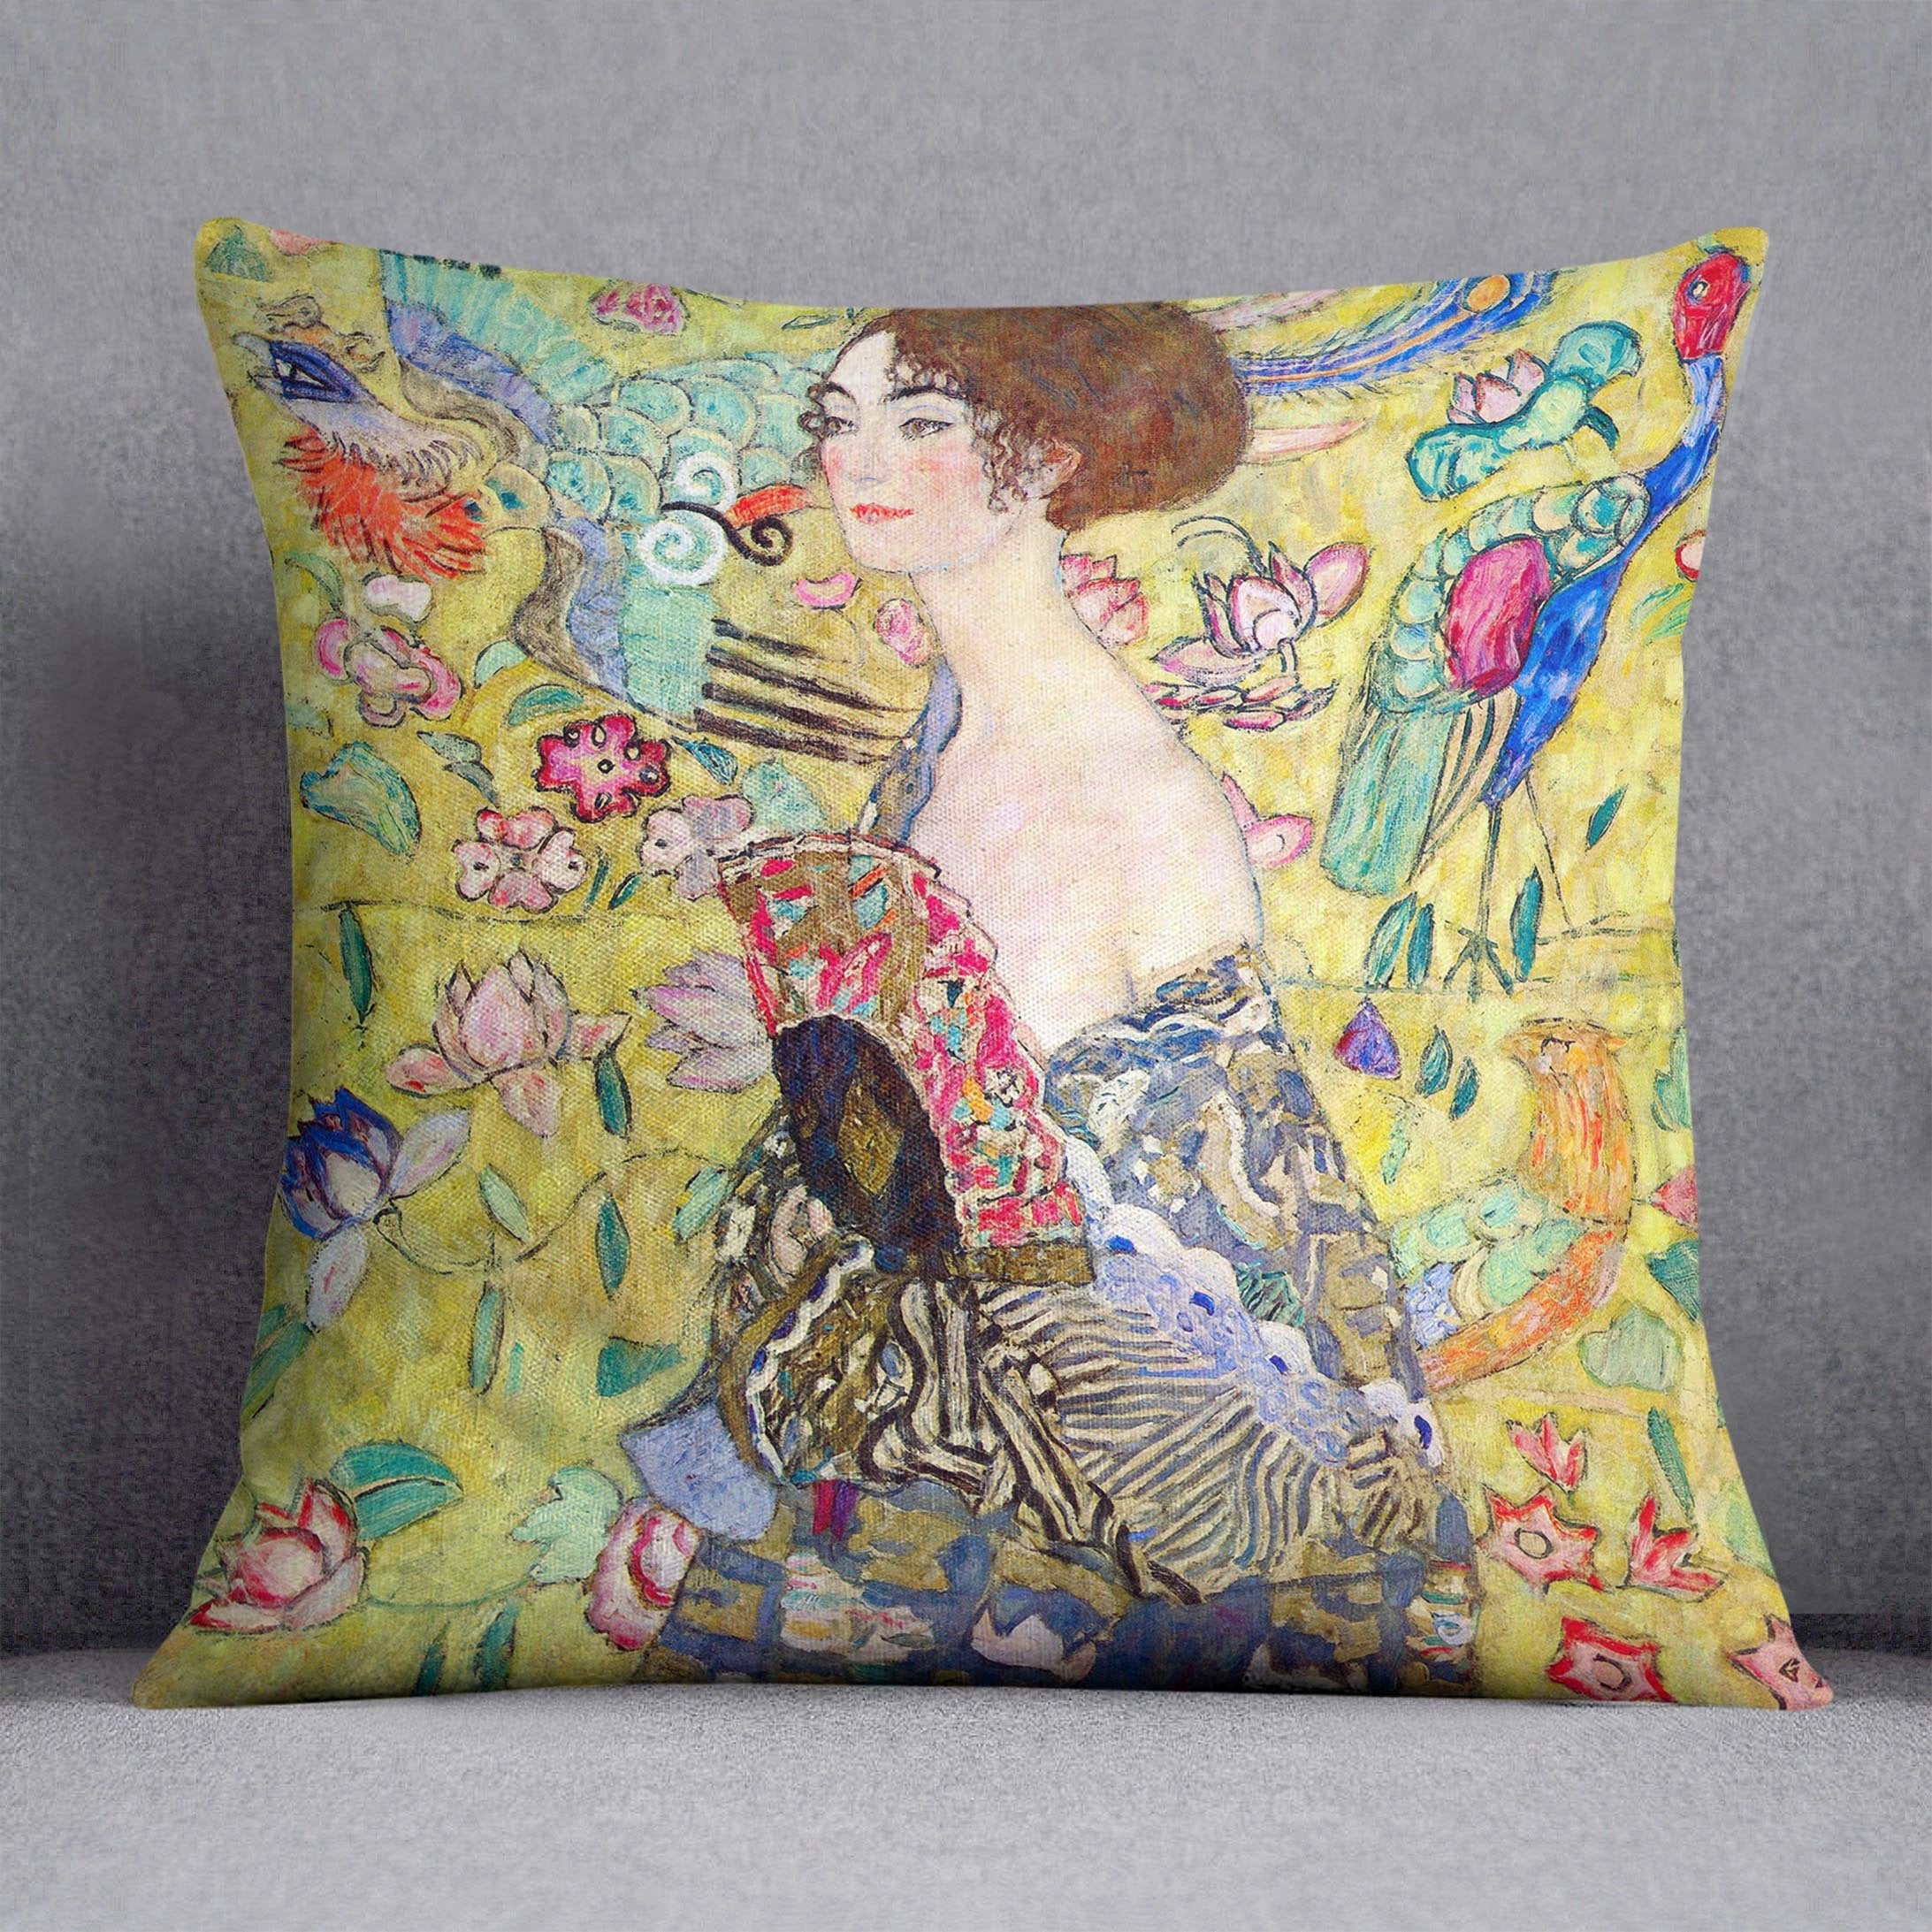 Lady with fan by Klimt Throw Pillow